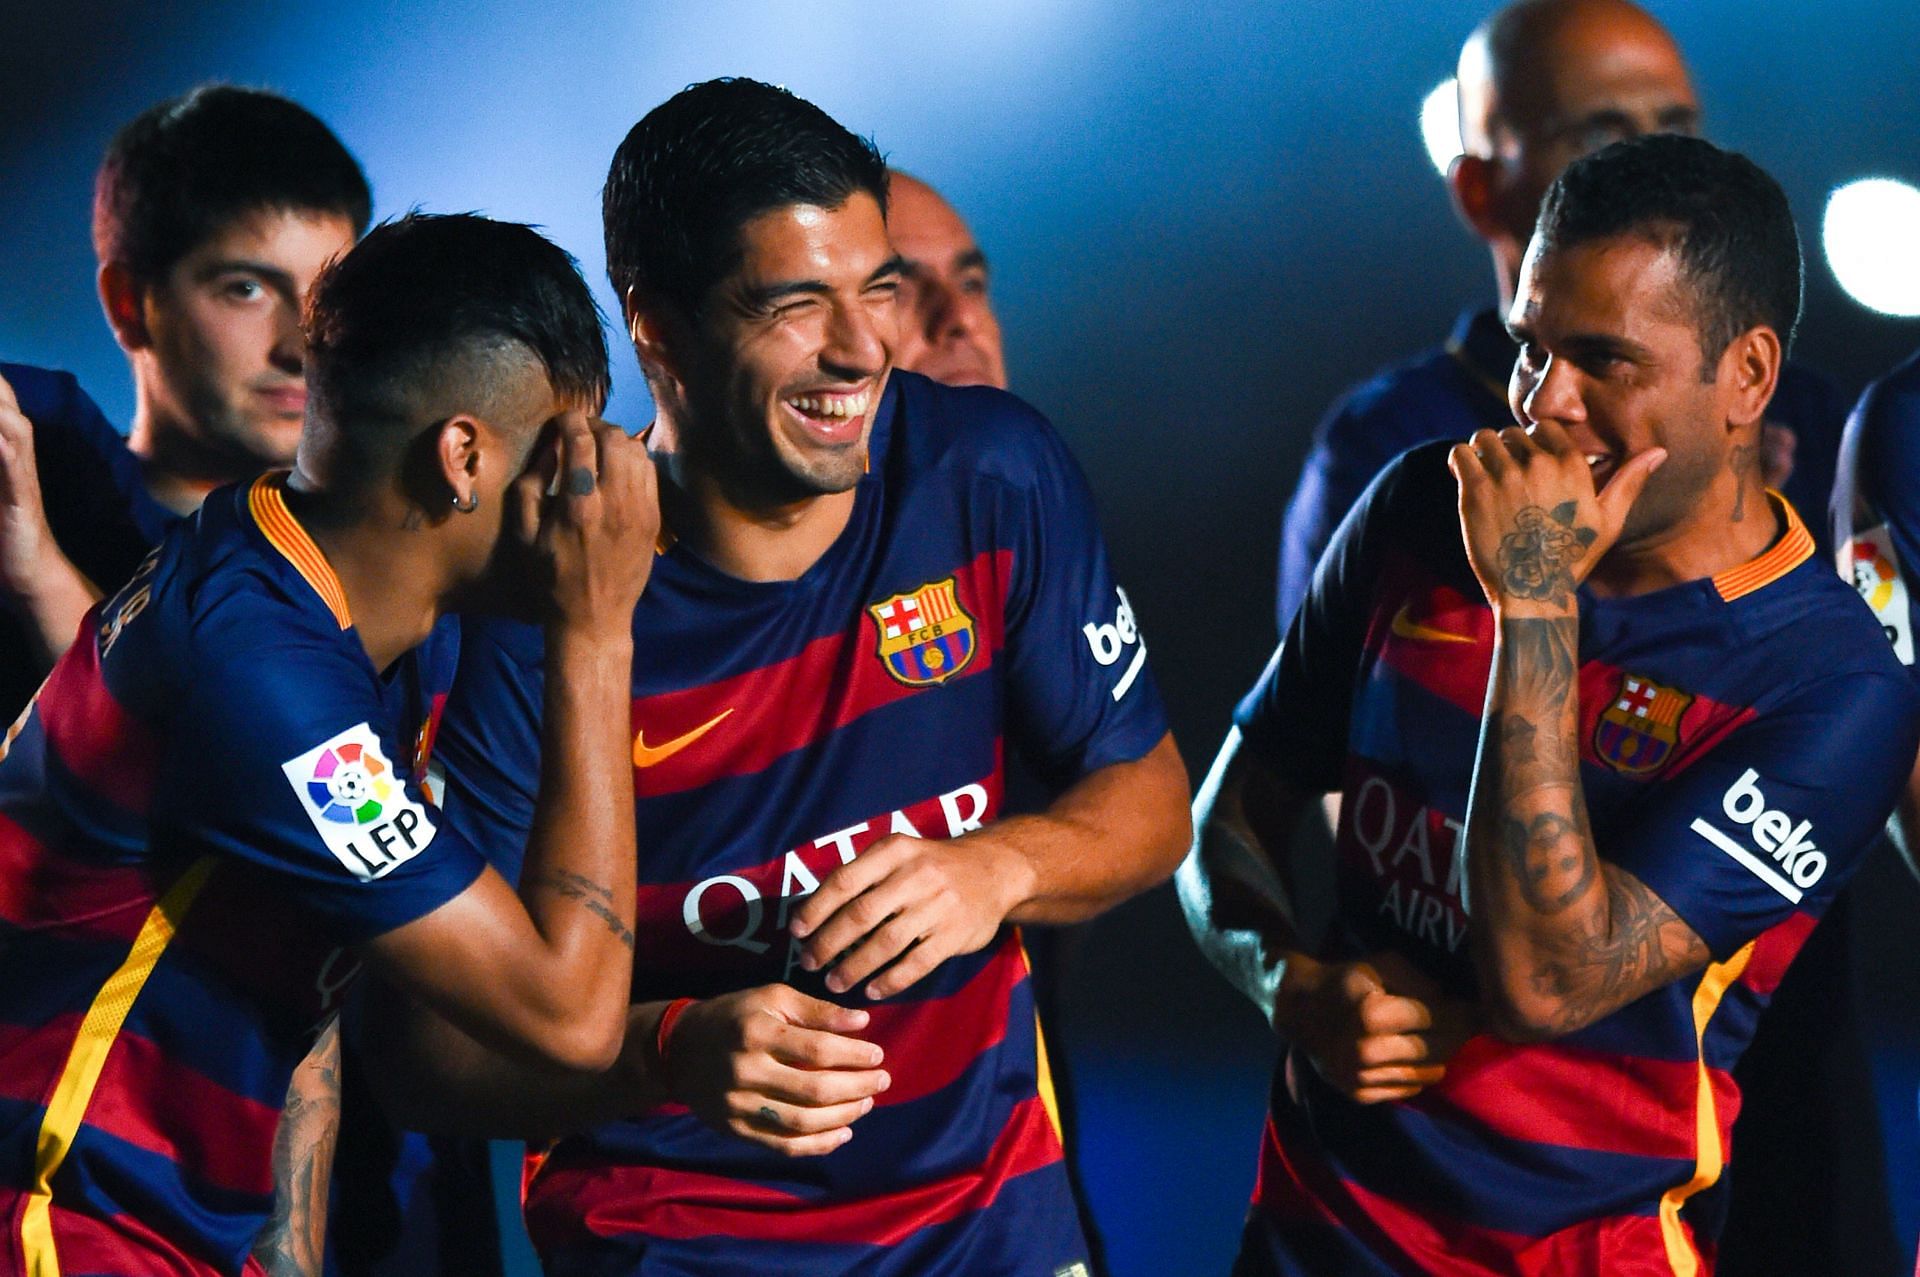 Luis Suarez is one of several Barcelona players who left after clashing with his club.